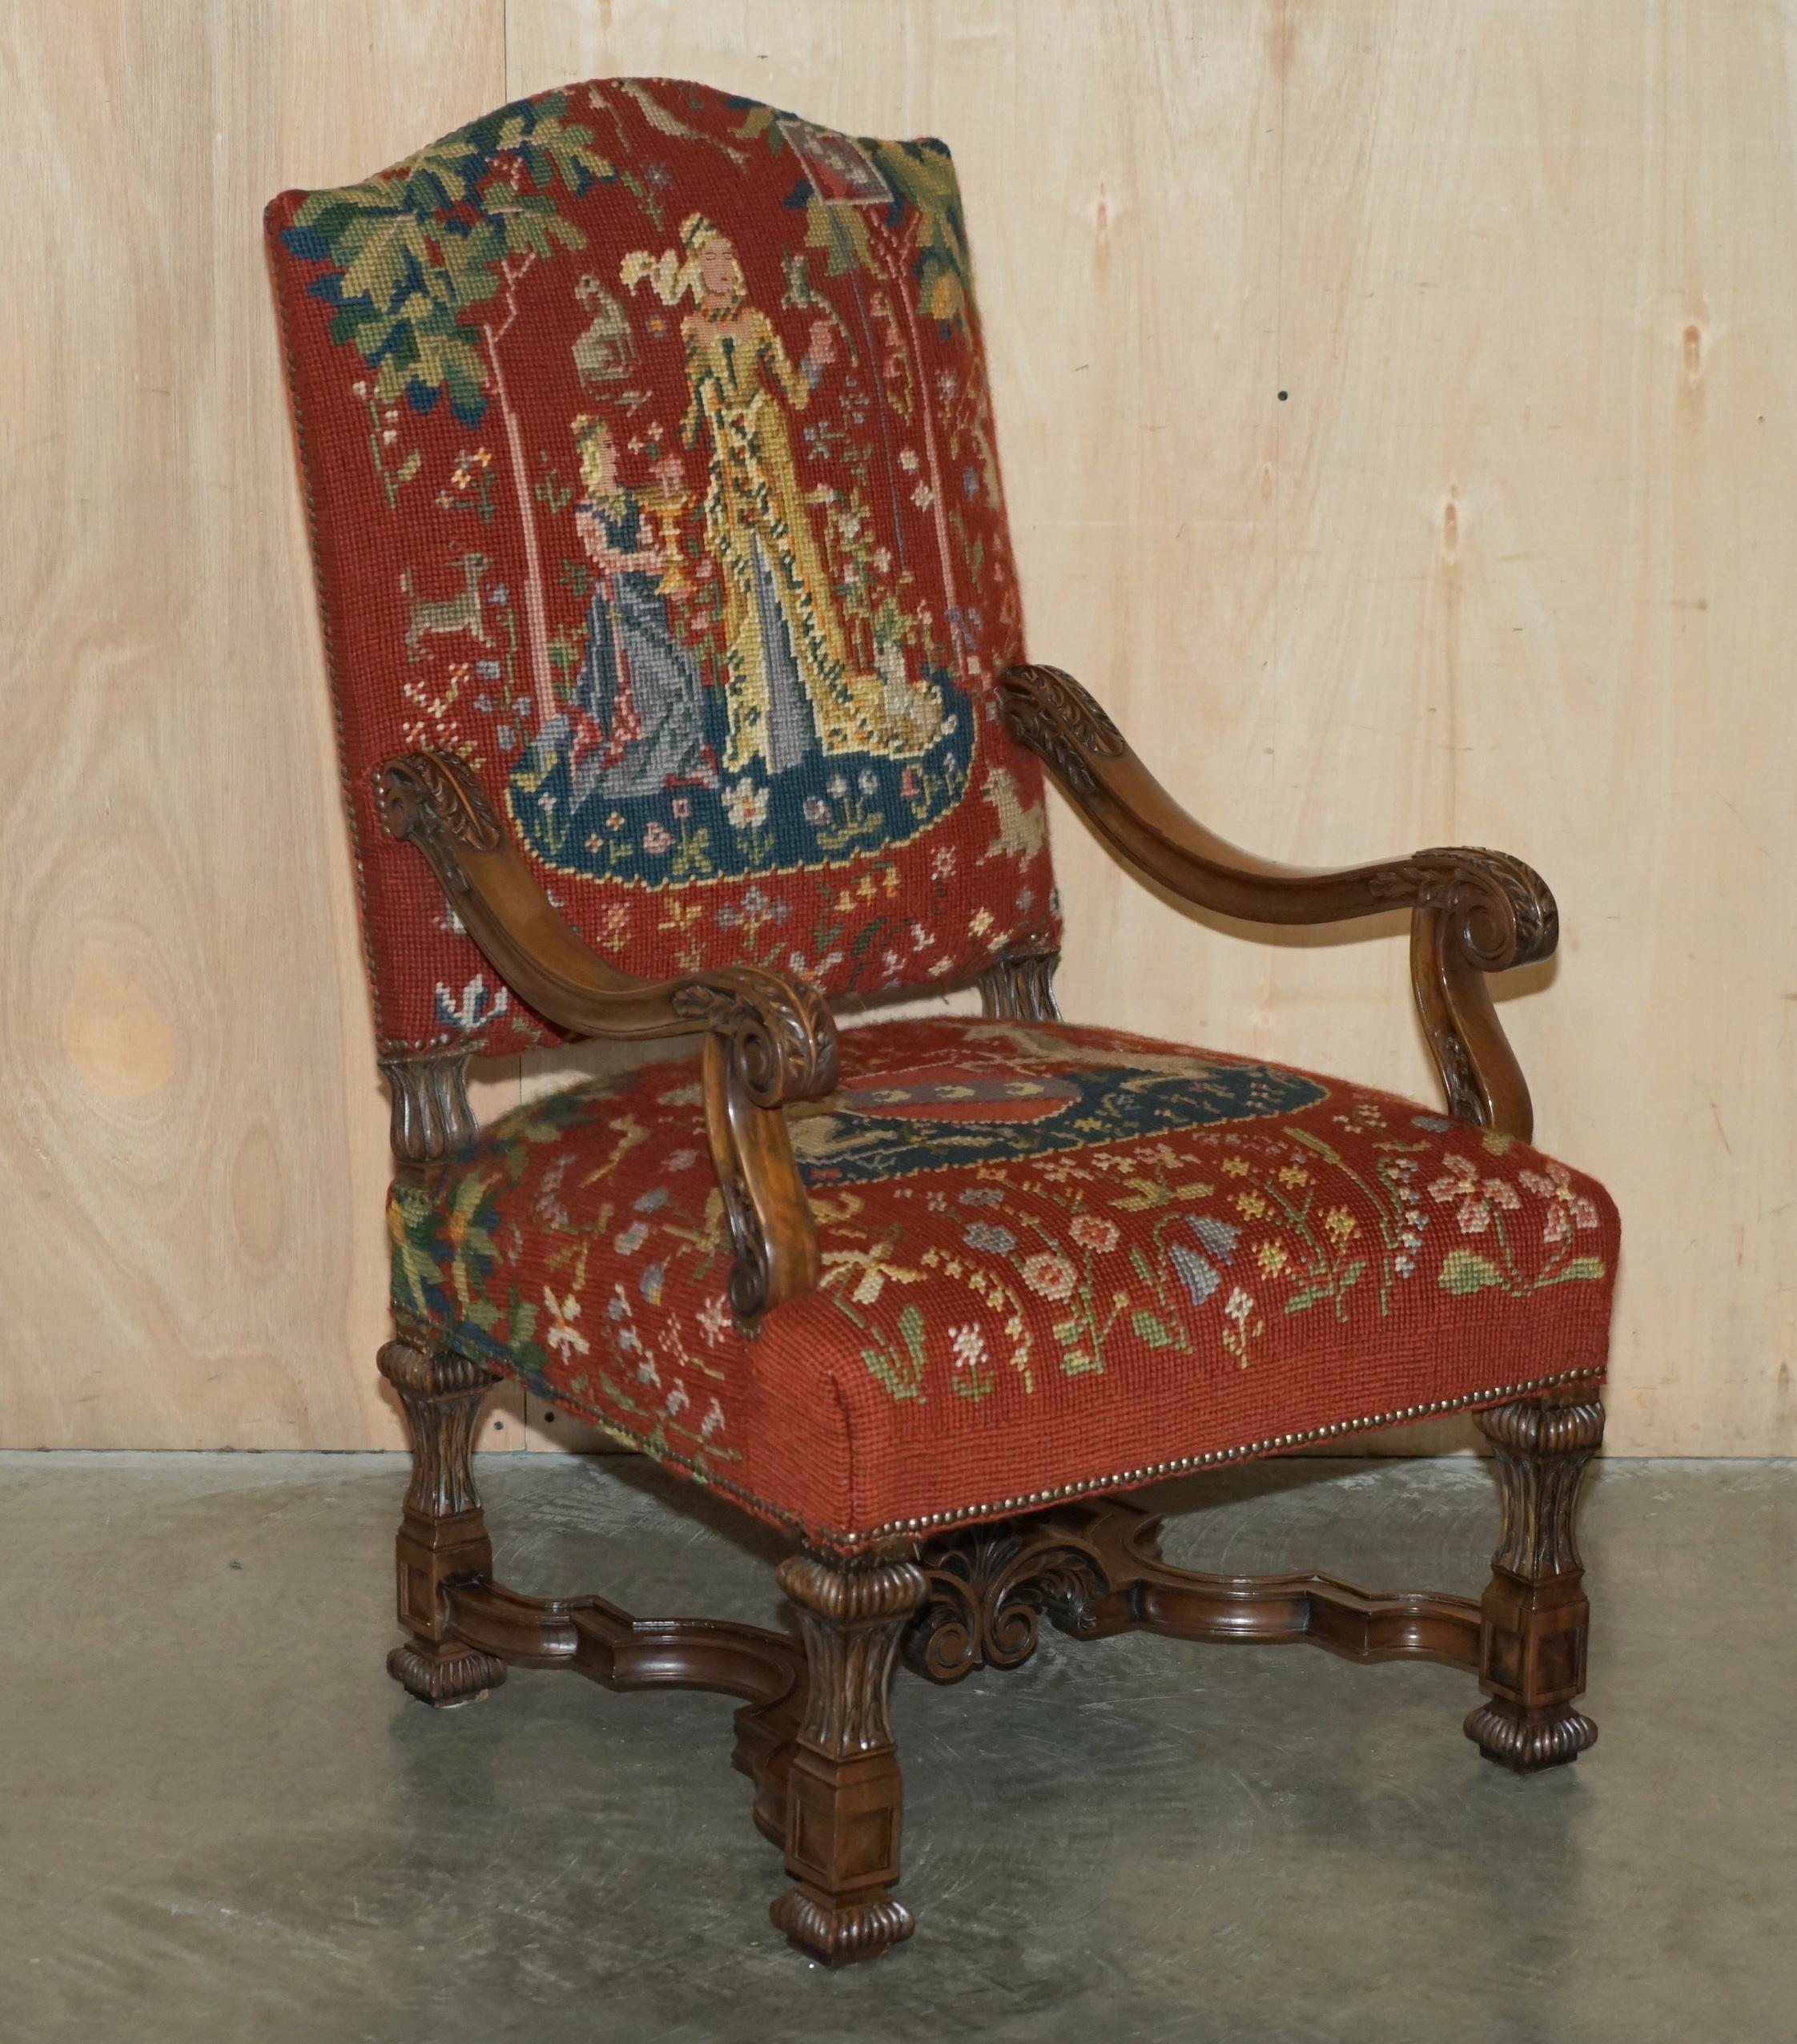 Royal House Antiques

Royal House Antiques is delighted to offer for sale this very large, hand made, Italian throne style armchair with ornately carved frames and matching footstool 

Please note the delivery fee listed is just a guide, it covers